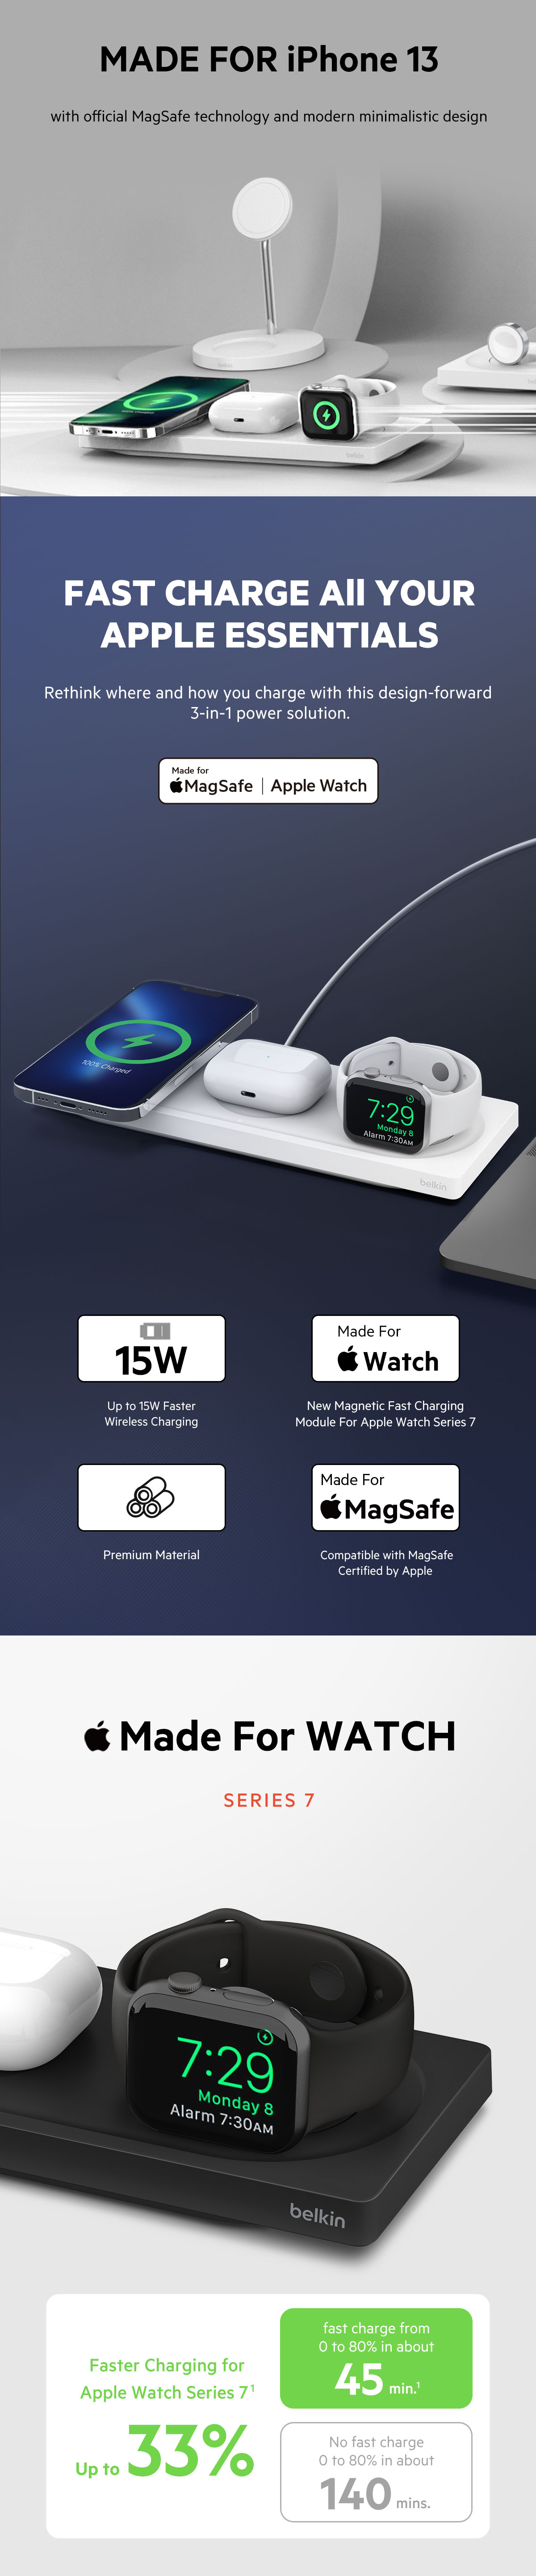 Belkin BoostCharge Pro 3-in-1 Wireless Charger with MagSafe 15W